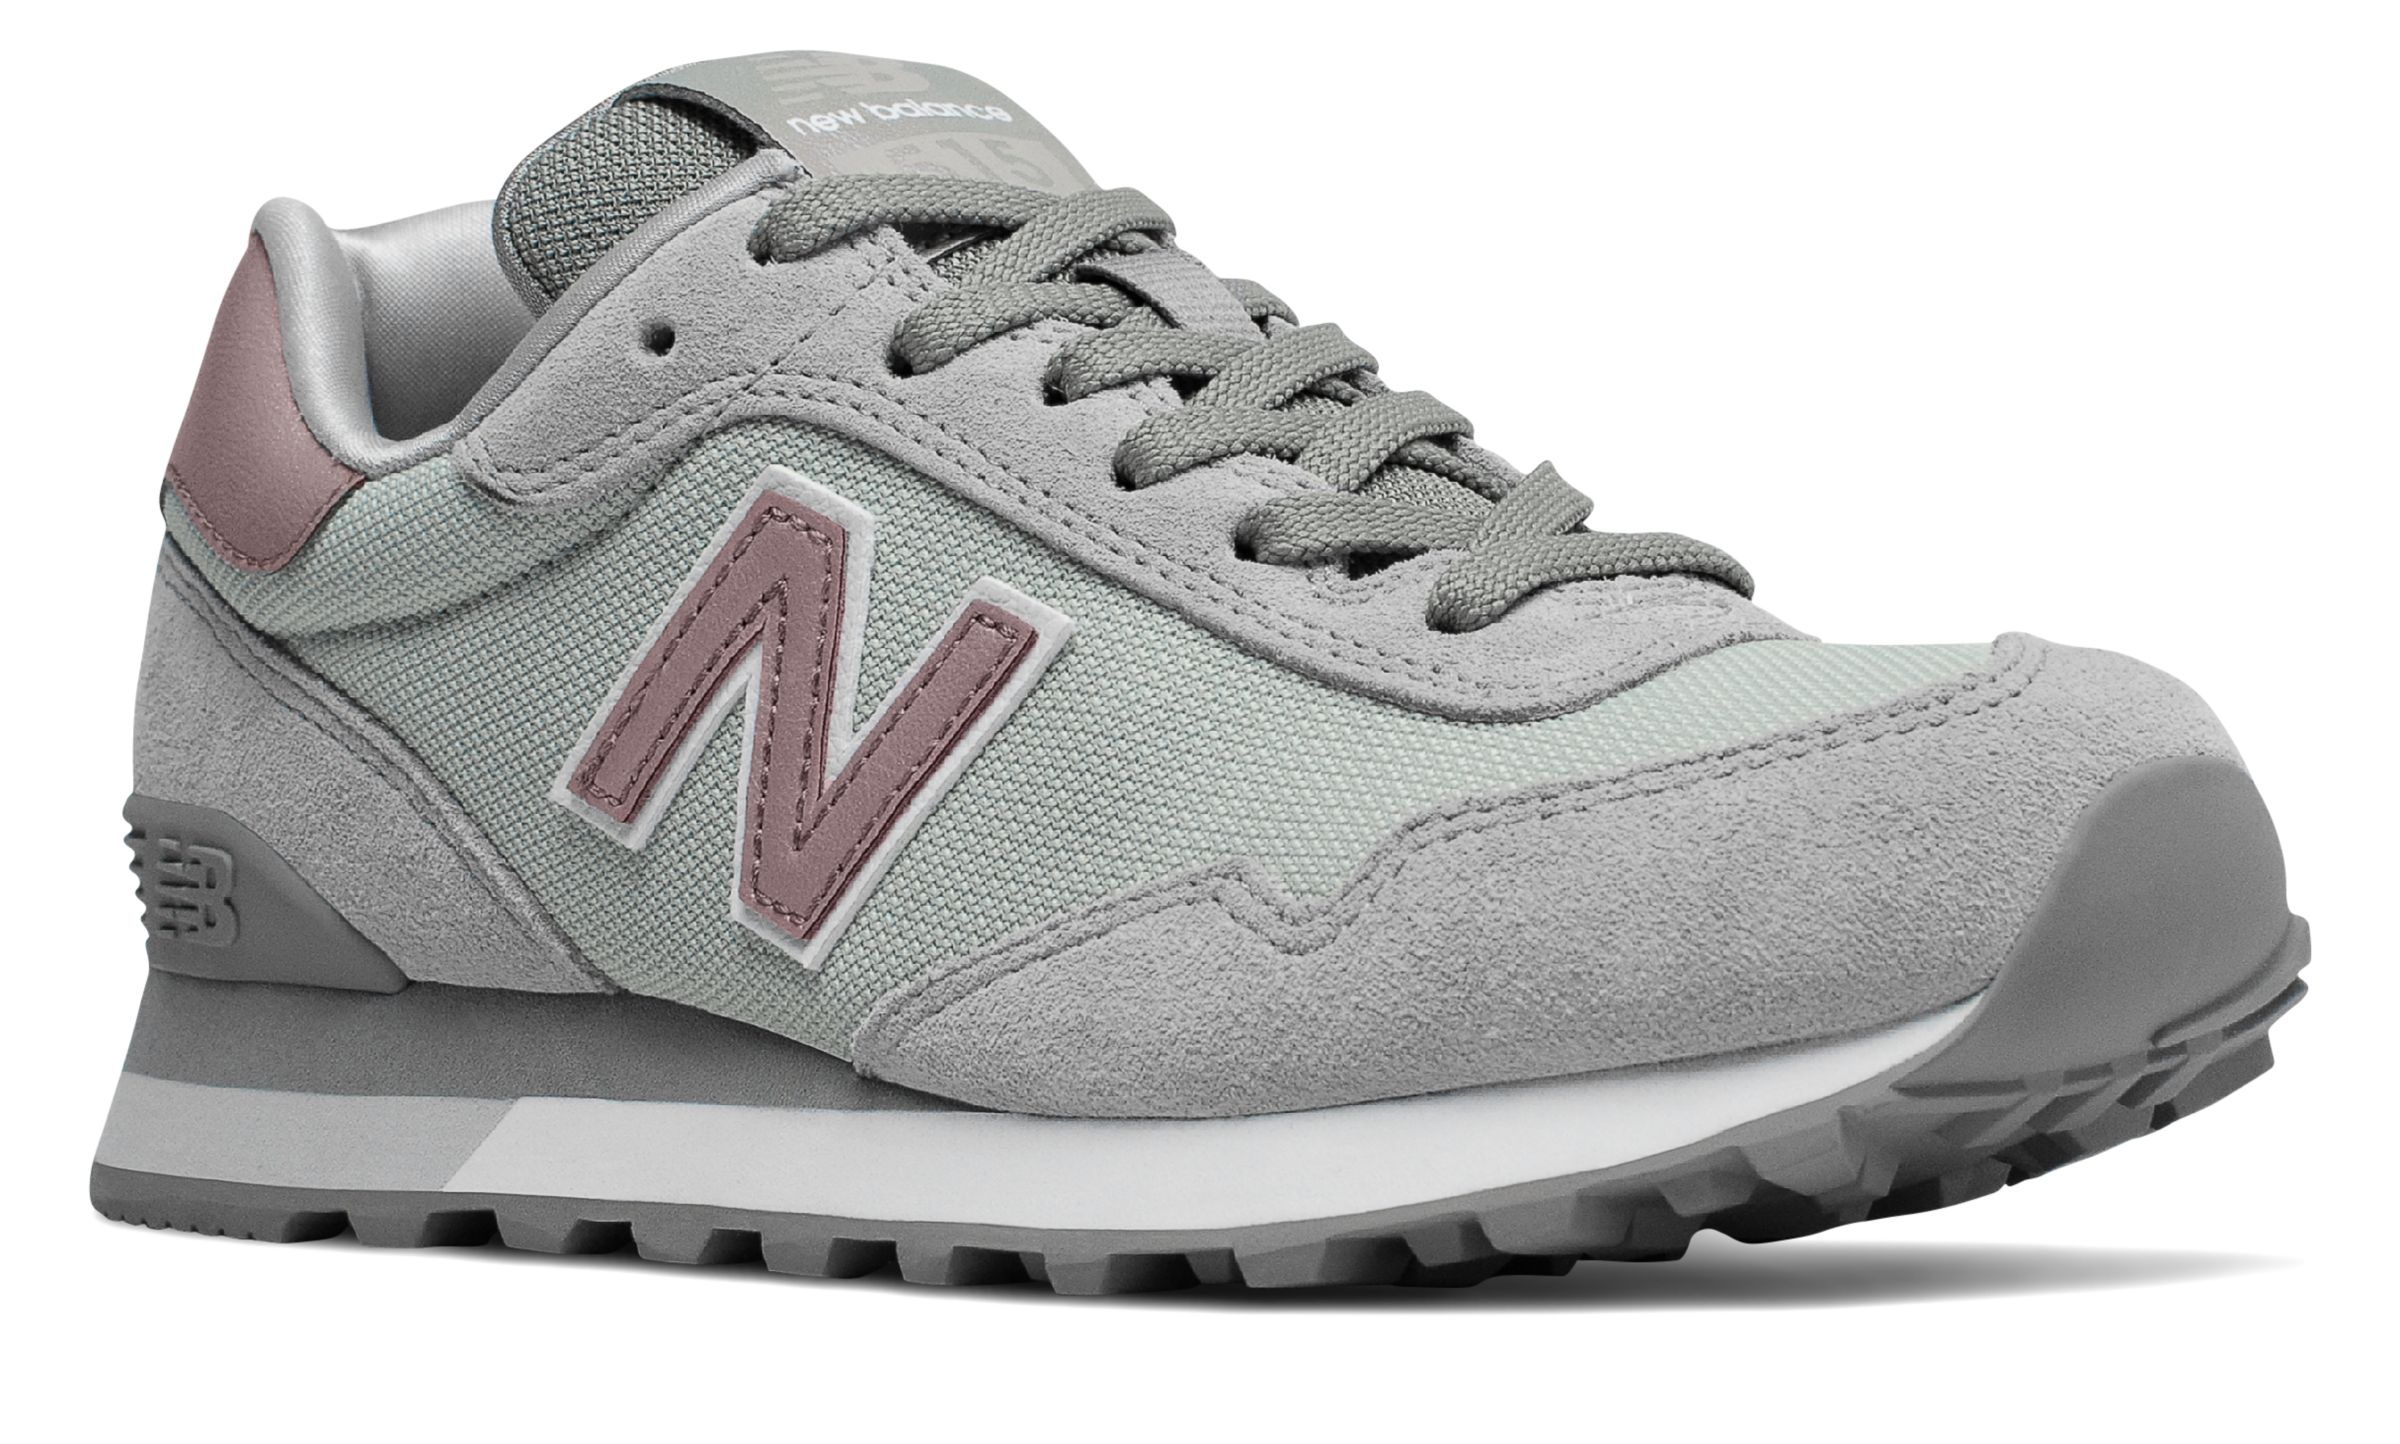 Off on WL515CSB at Joe's New Balance Outlet